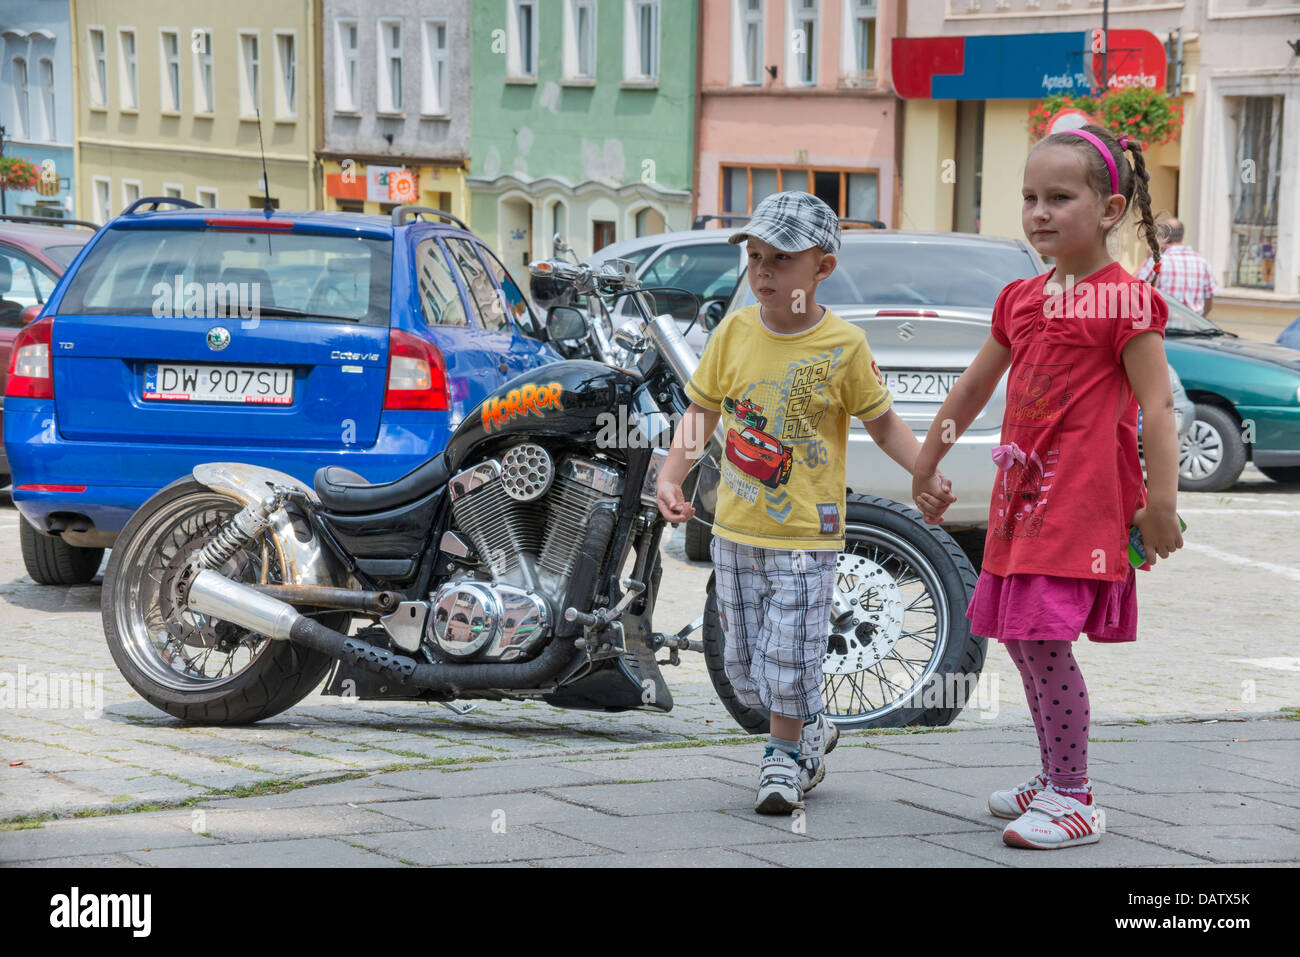 Children and 'Horror' modified motorcycle in Bolkow, Silesia, Poland Stock Photo